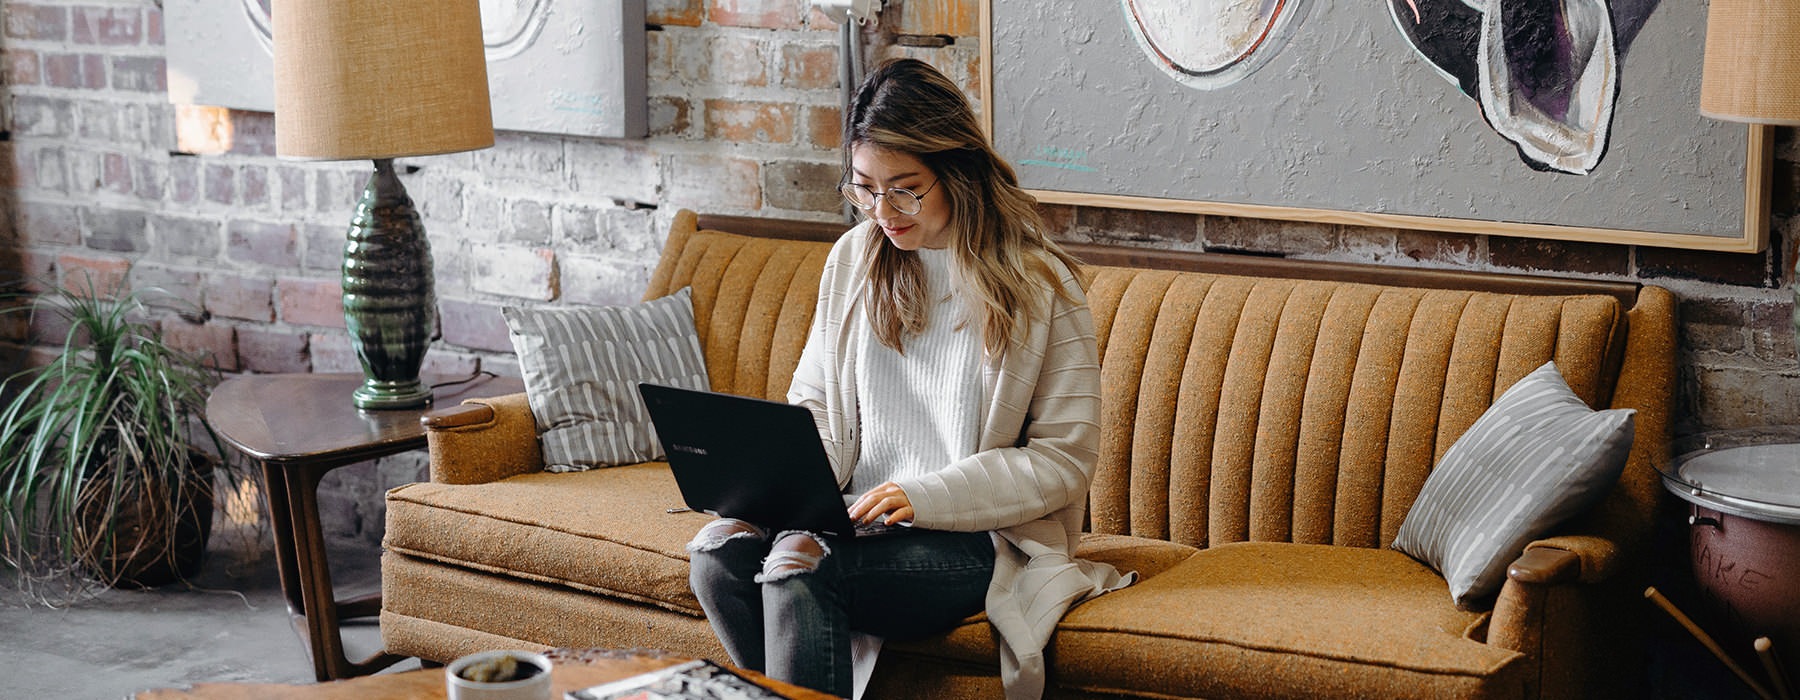 young woman sits on a cafe couch while working on her laptops